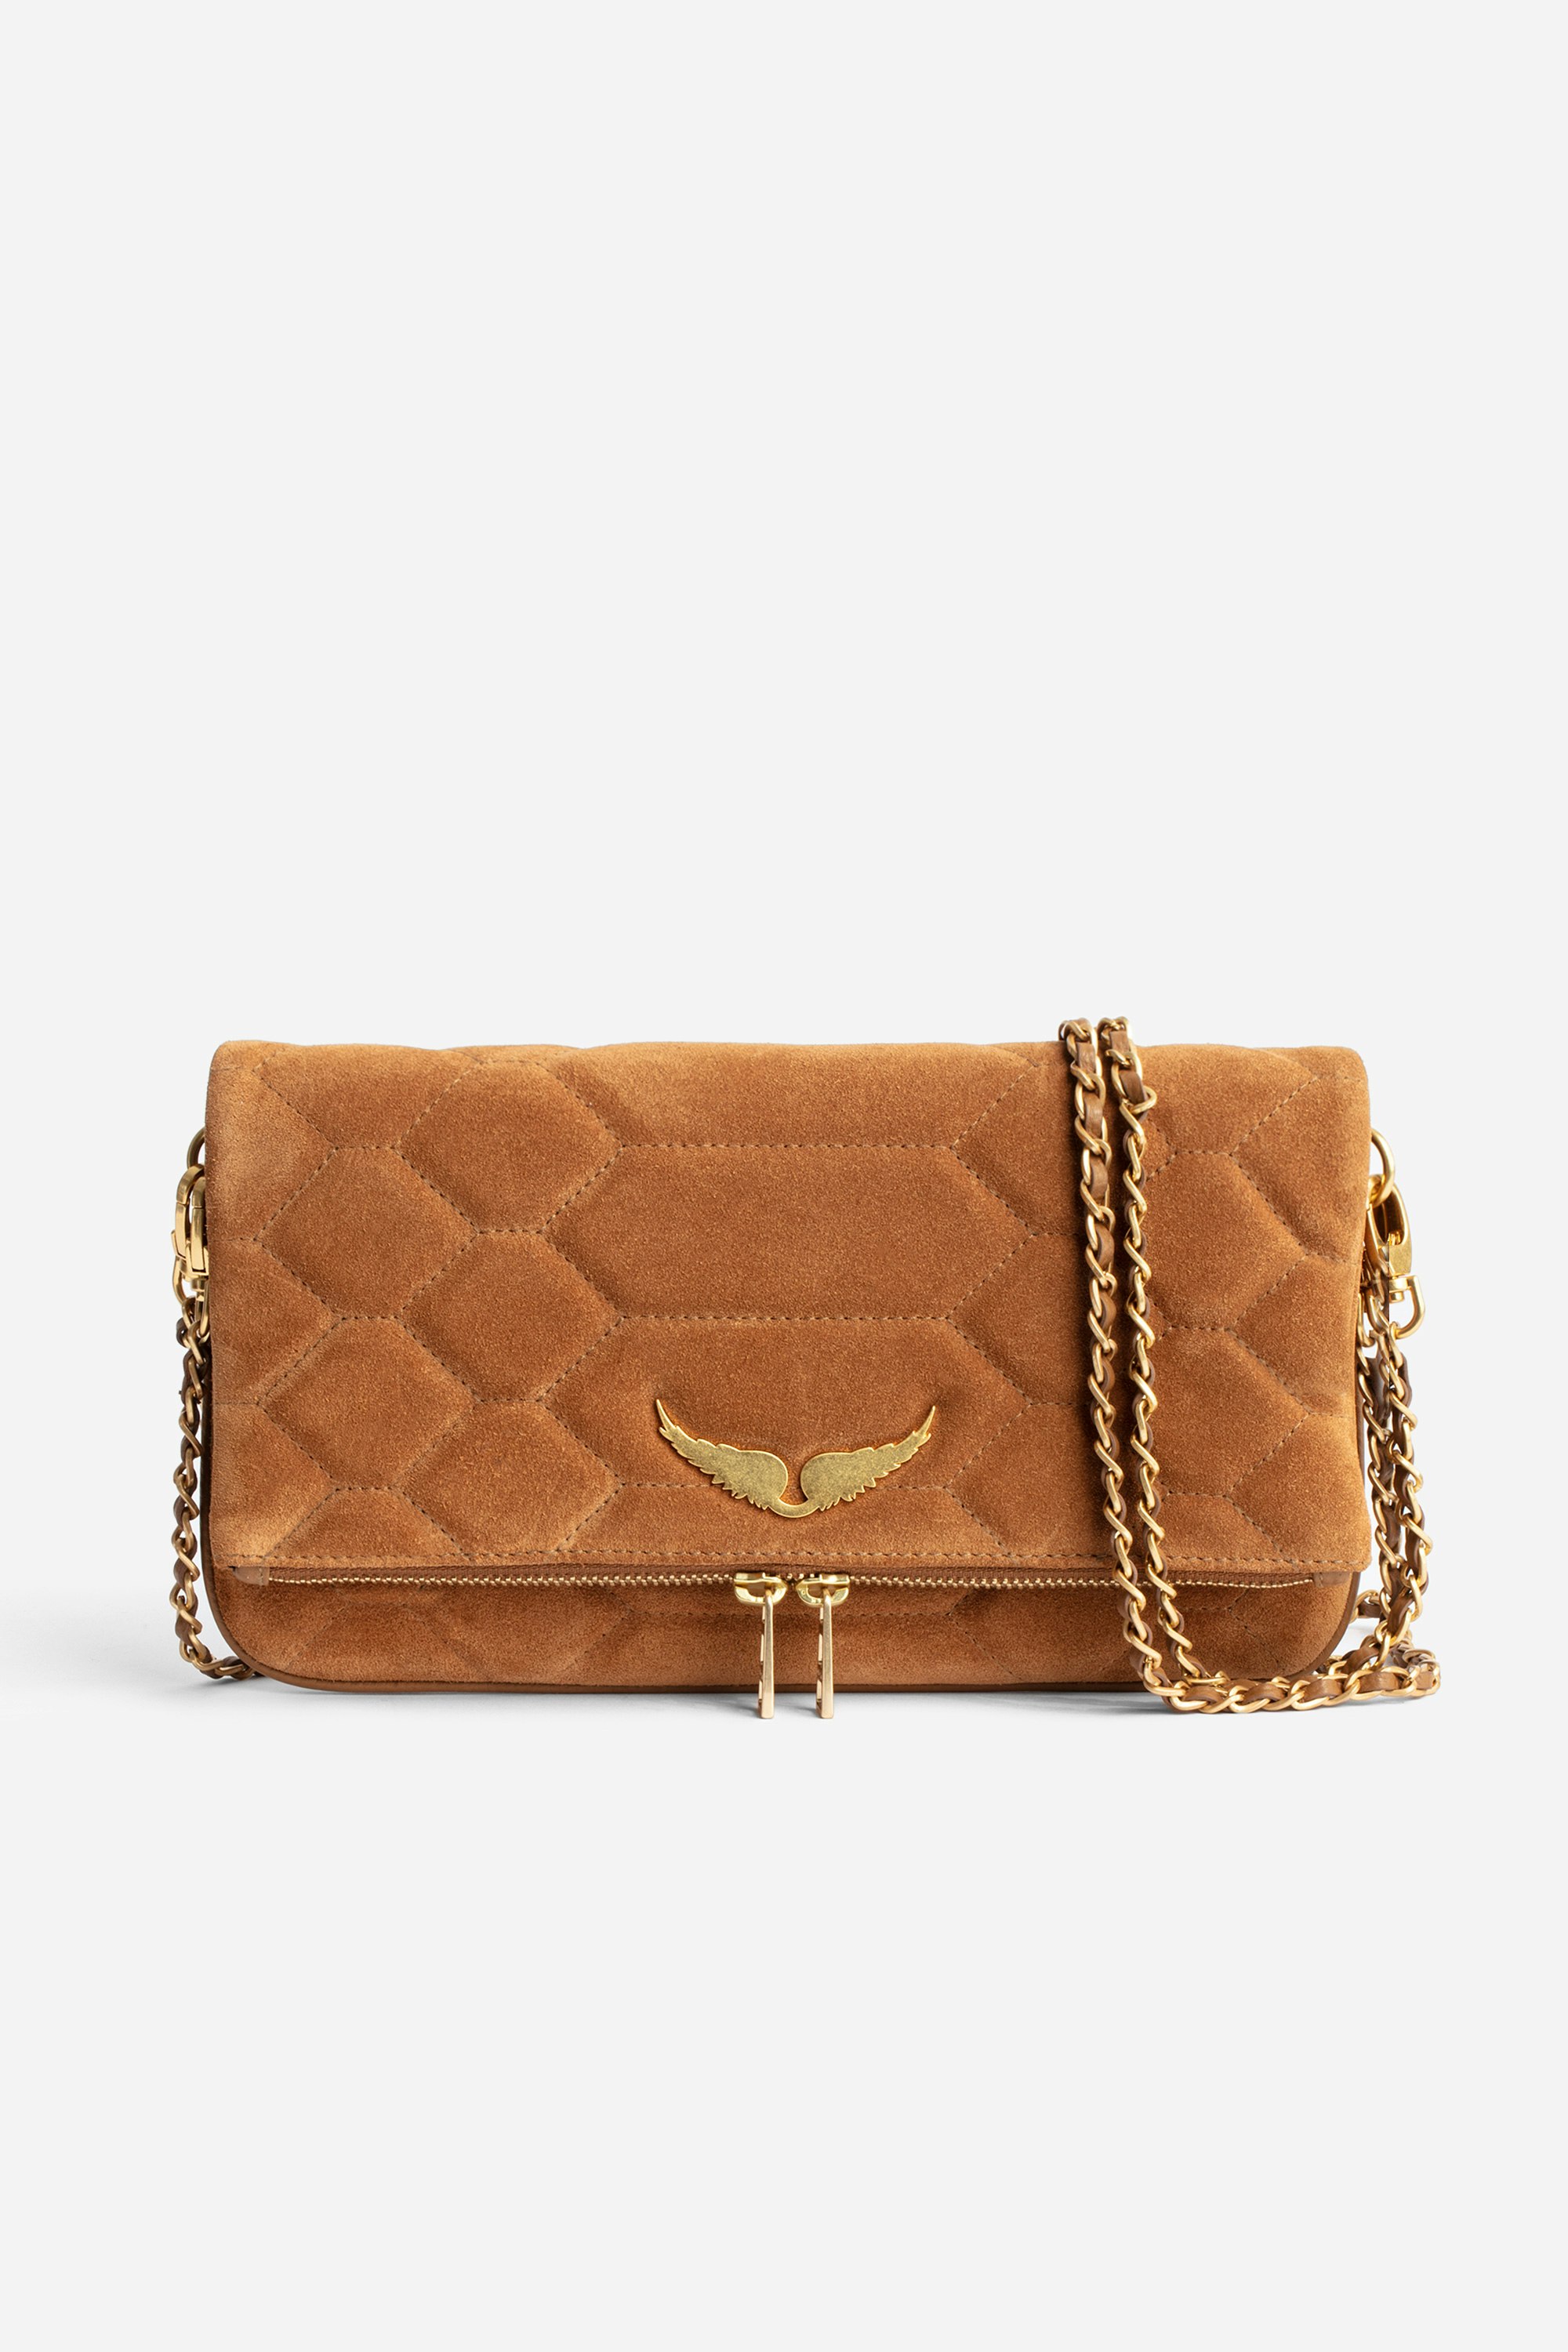 Rock Quilted Suede Clutch Women’s camel snakeskin-effect quilted suede clutch with wings charm.